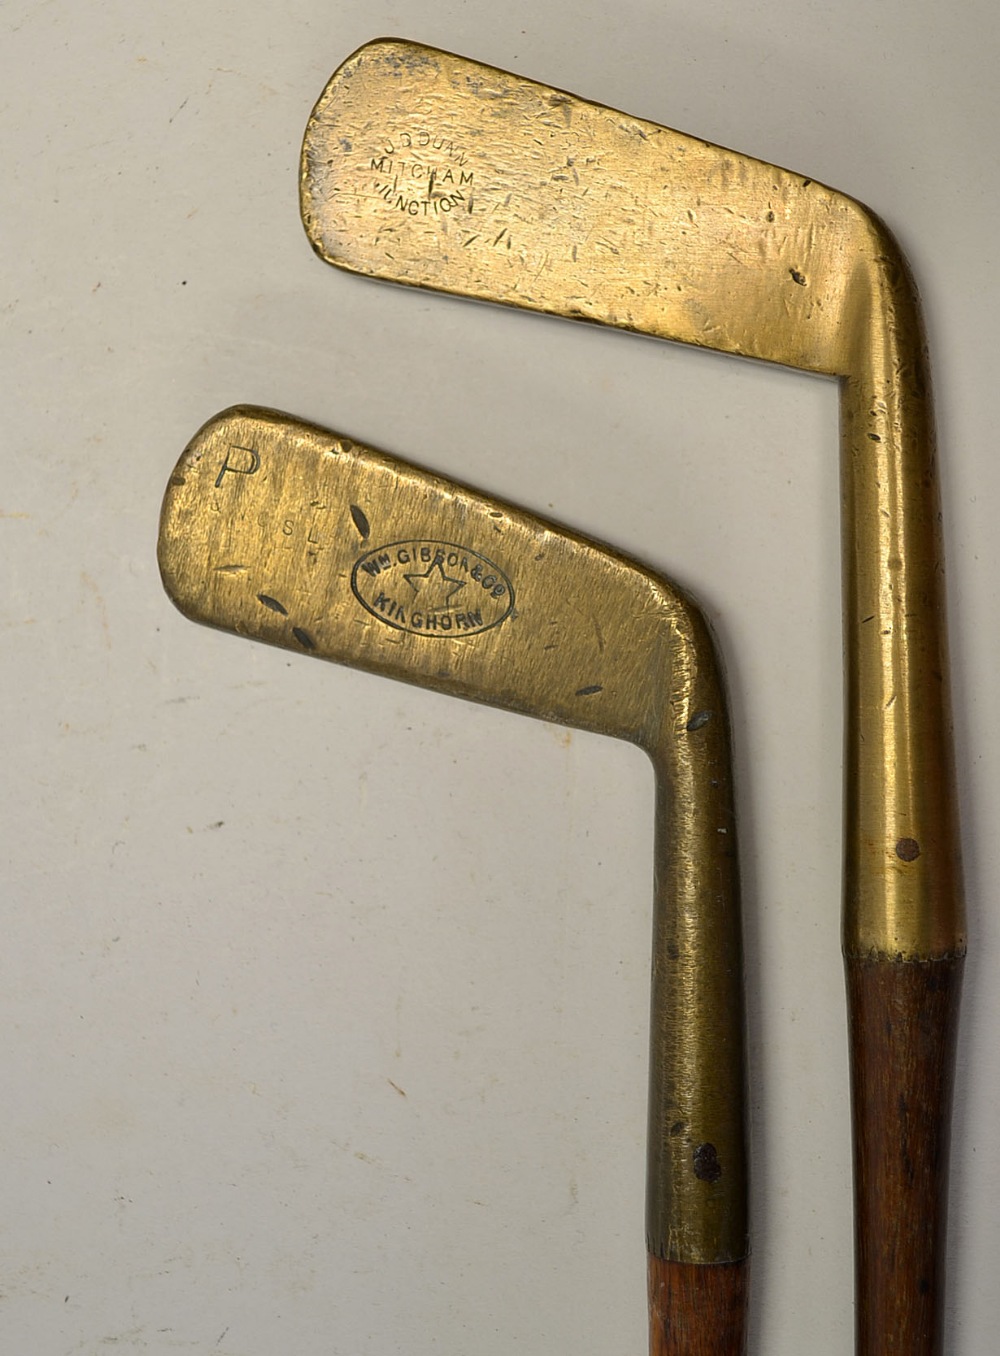 2x Heavy thick top brass blade putters c.1895 to incl Gibson Kinghorn with Army & Navy shaft stamp